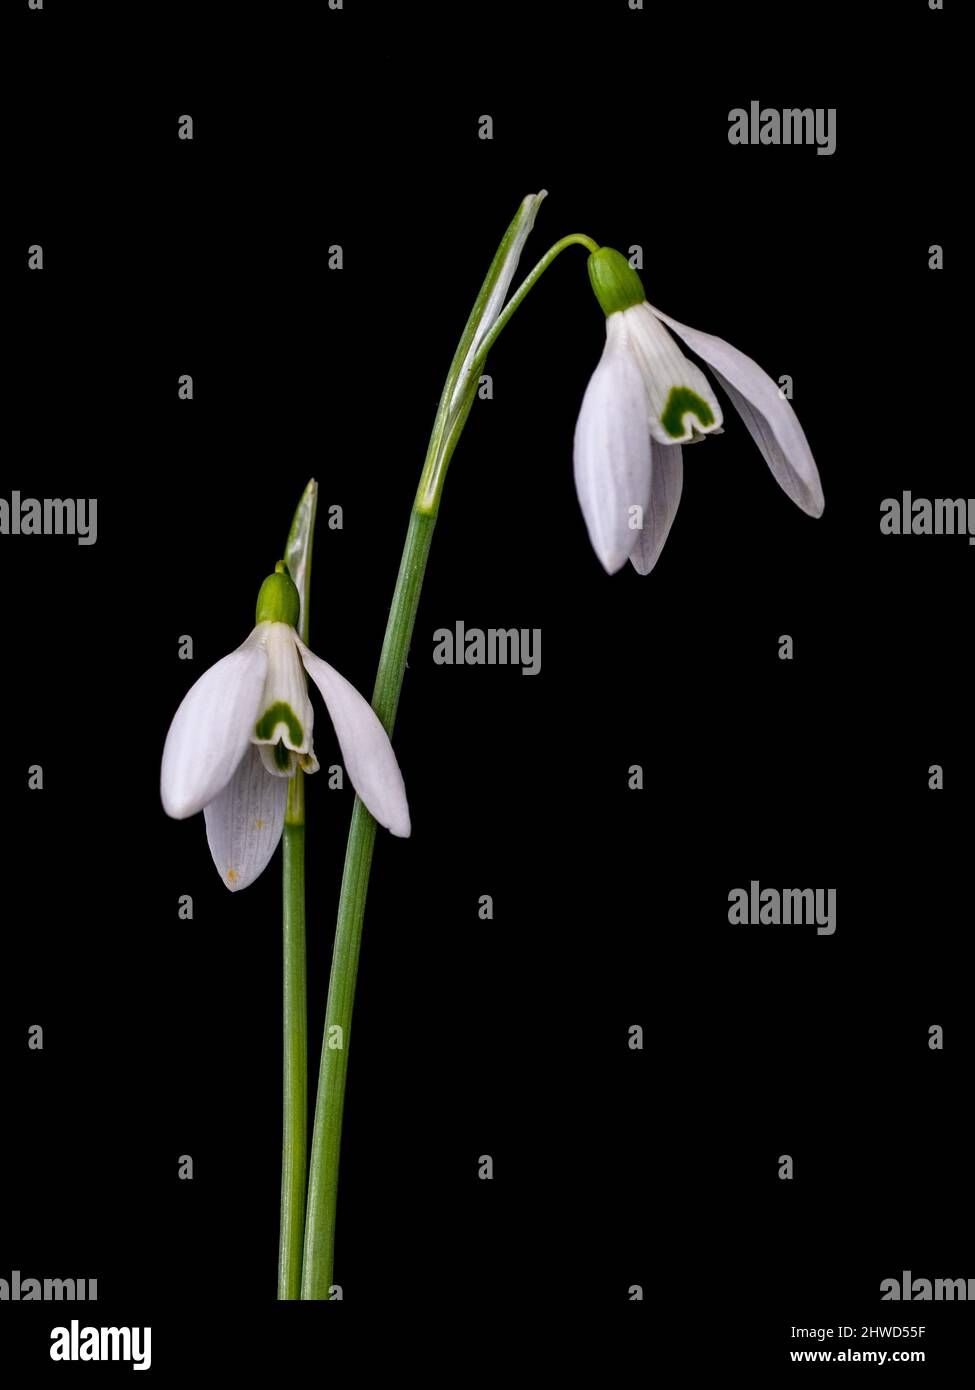 Two snowdrop flowers on black background. Stock Photo